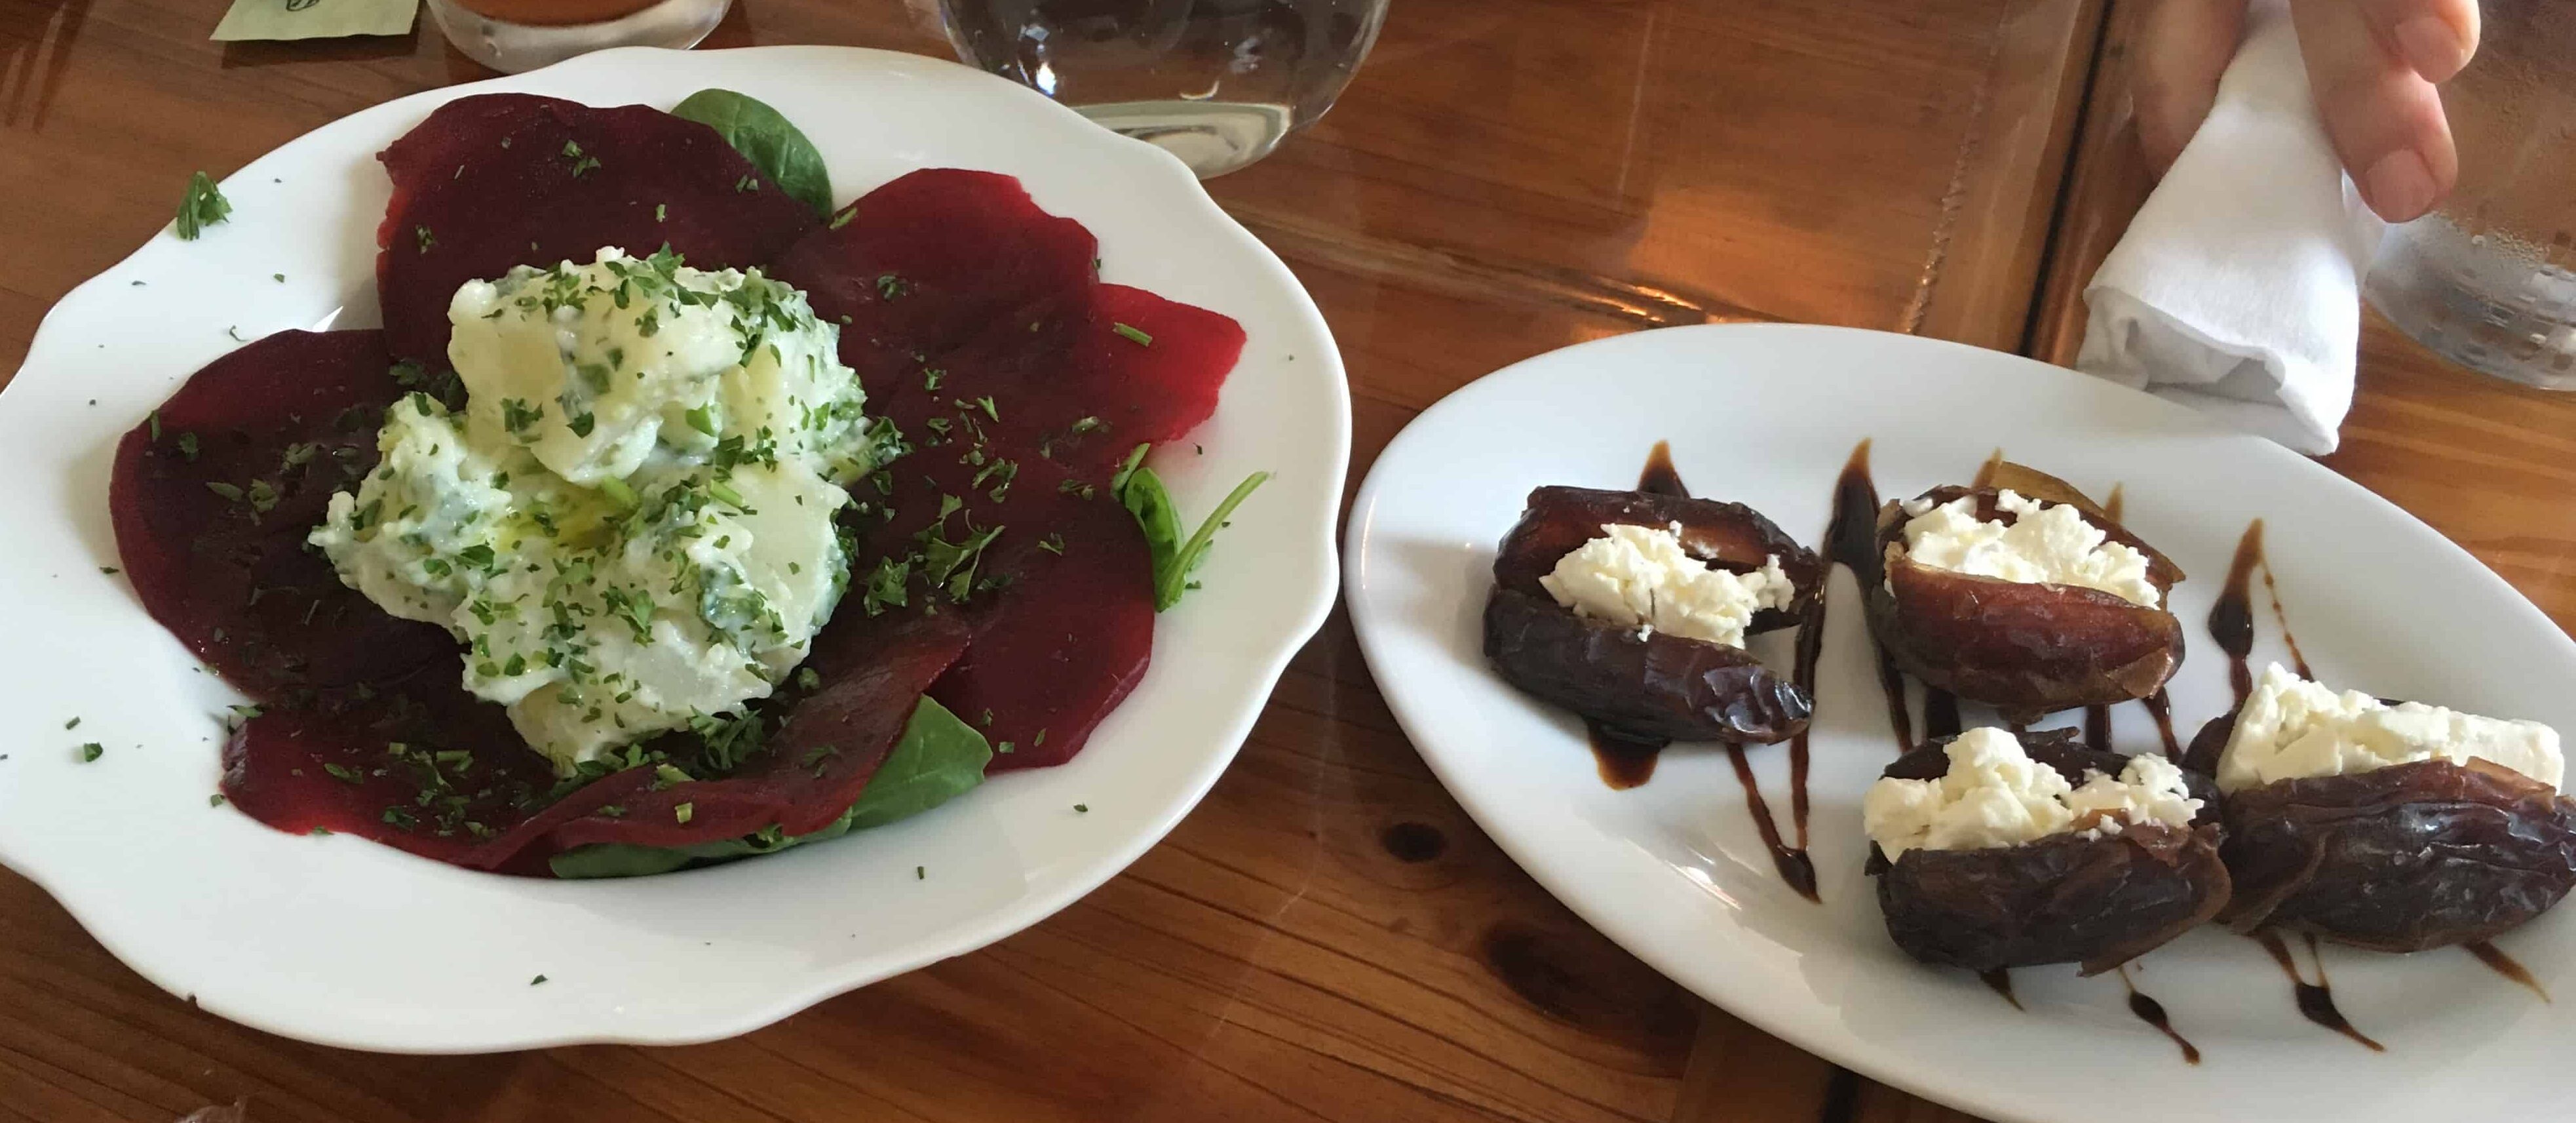 Beets with potatoes and dates stuffed with feta cheese at Meditrina in Valparaiso, Indiana